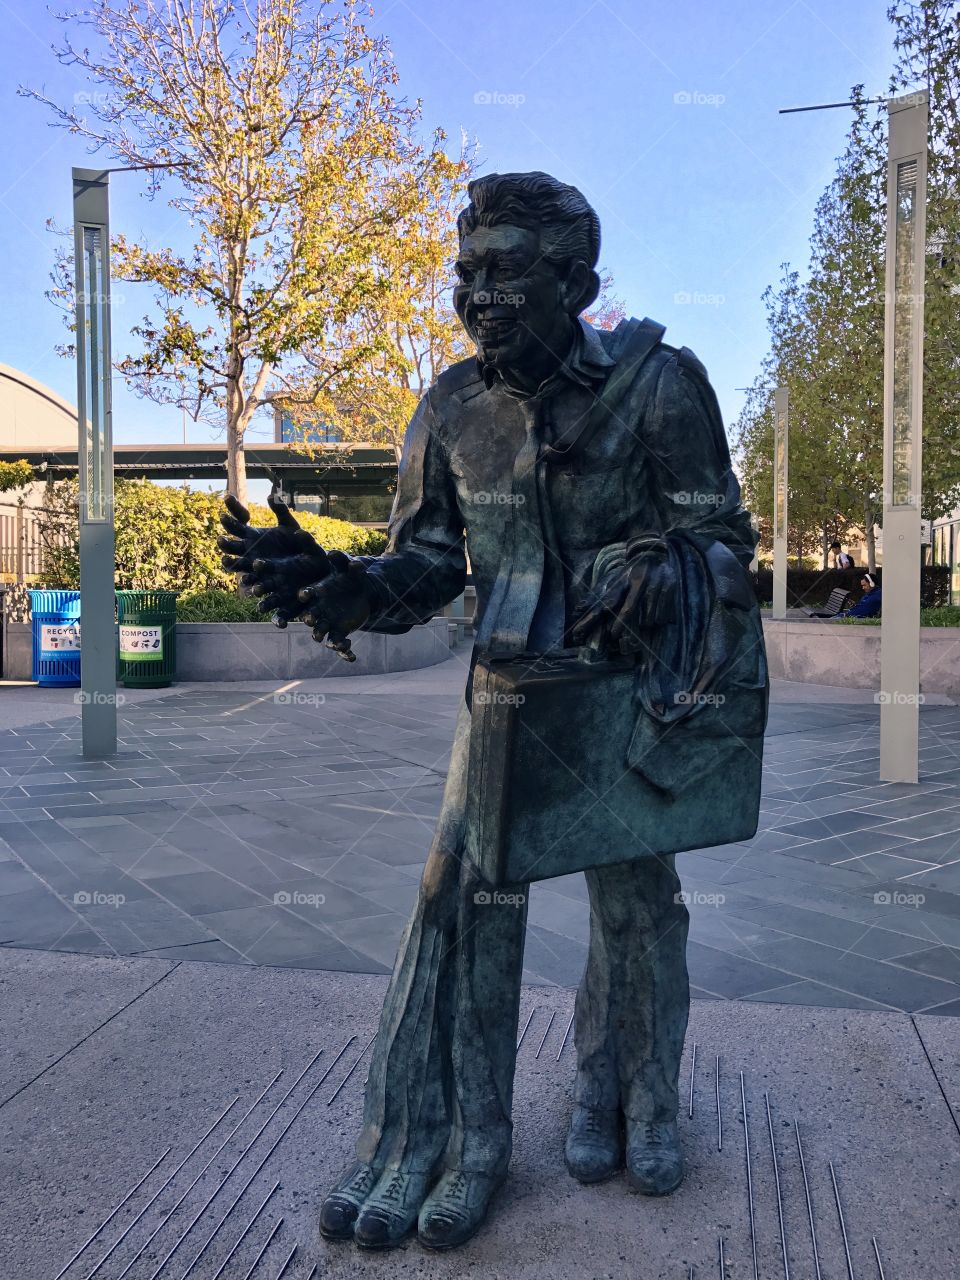 Statue of an old businessman coming apart.